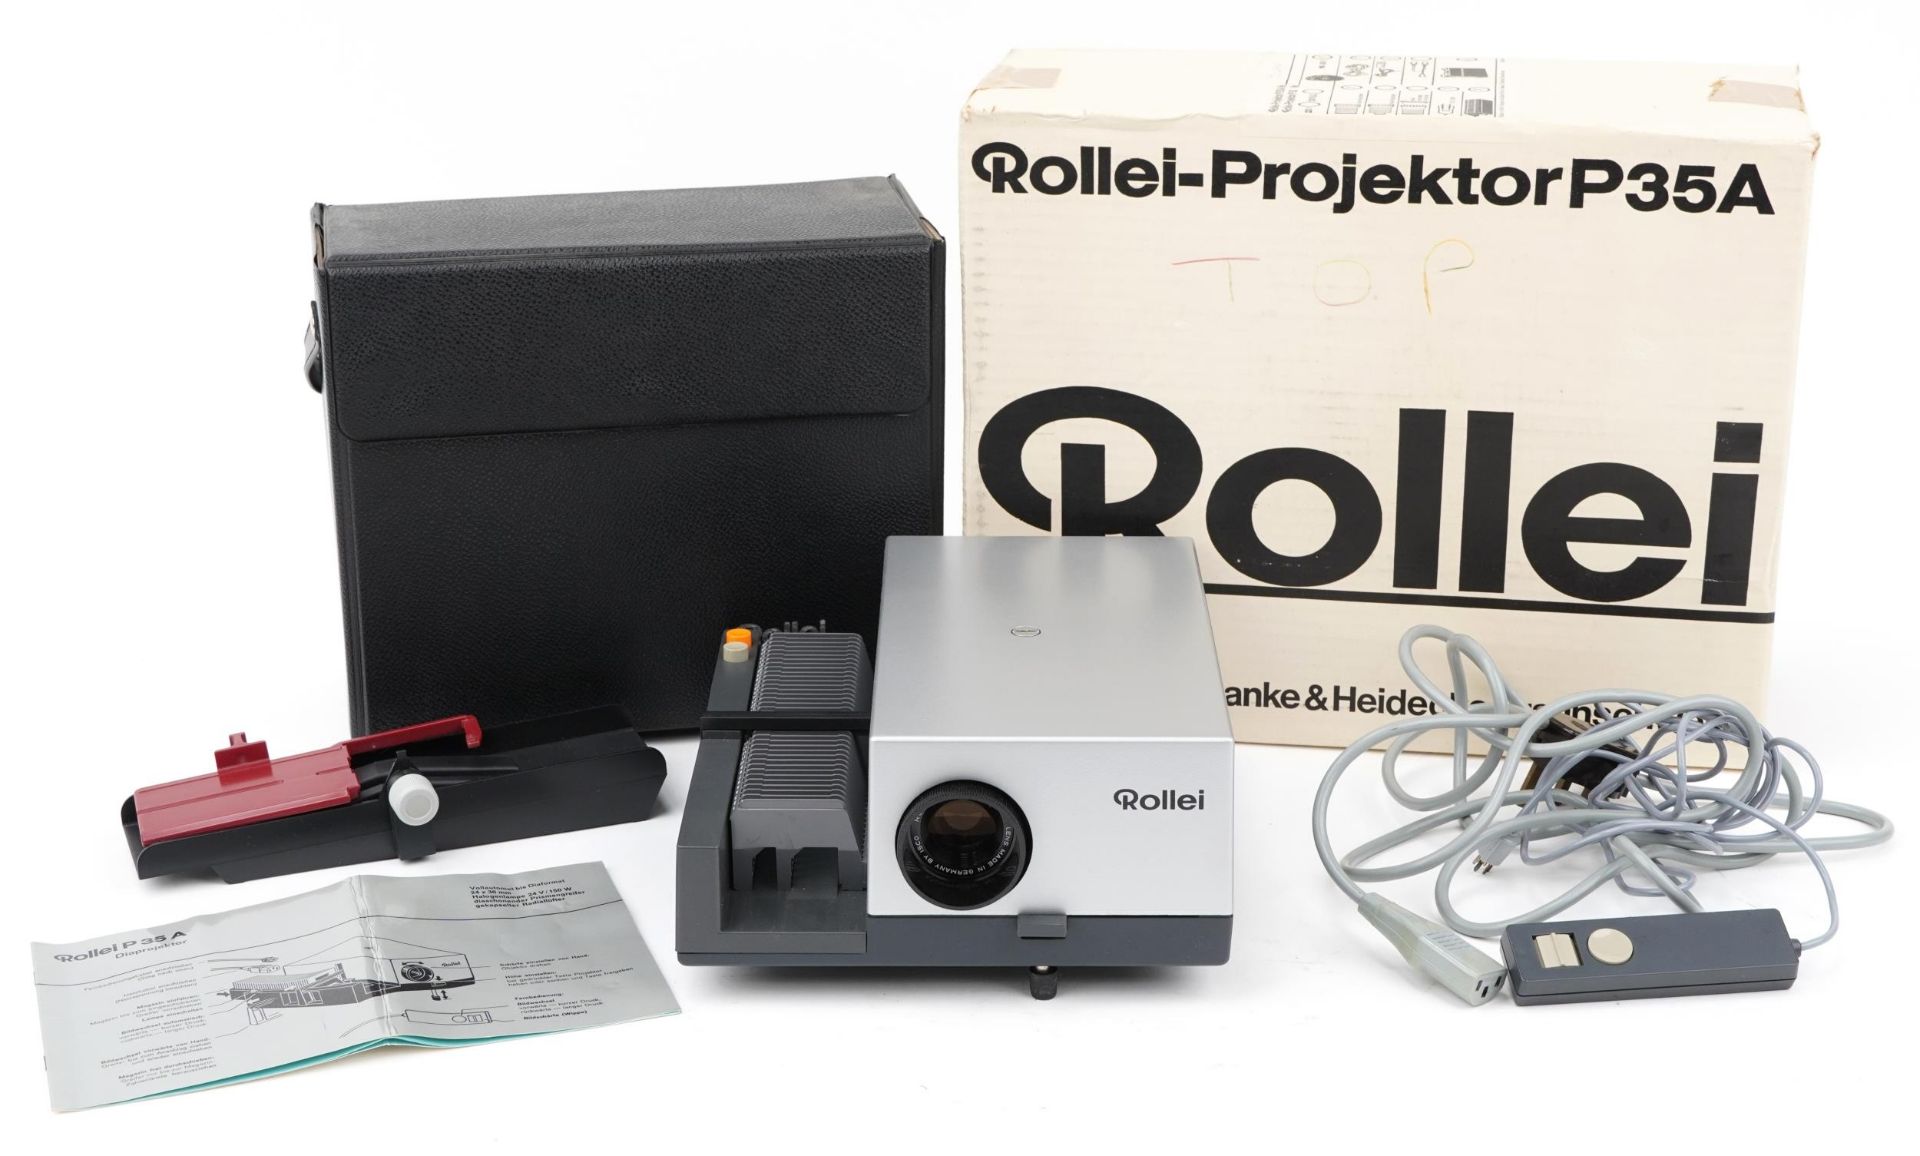 Rollei slide projector with box model P35A